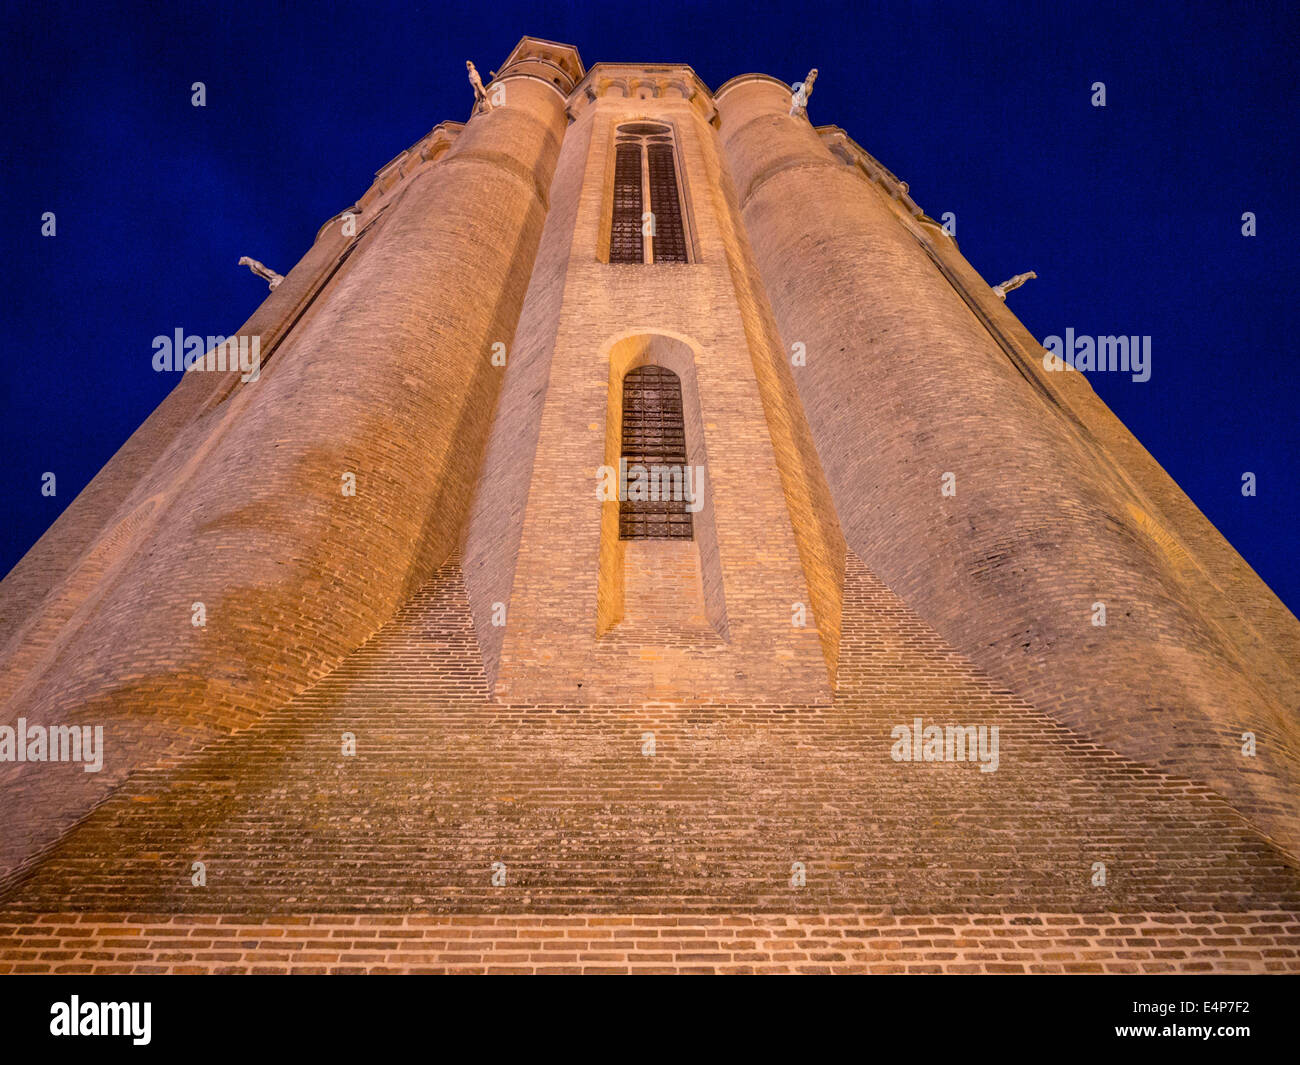 Imposing Main Tower of Albi's Cathedral. A night, floodlit view of the tower of the brick Cathedral in Albi. Gargoyles smile. Stock Photo